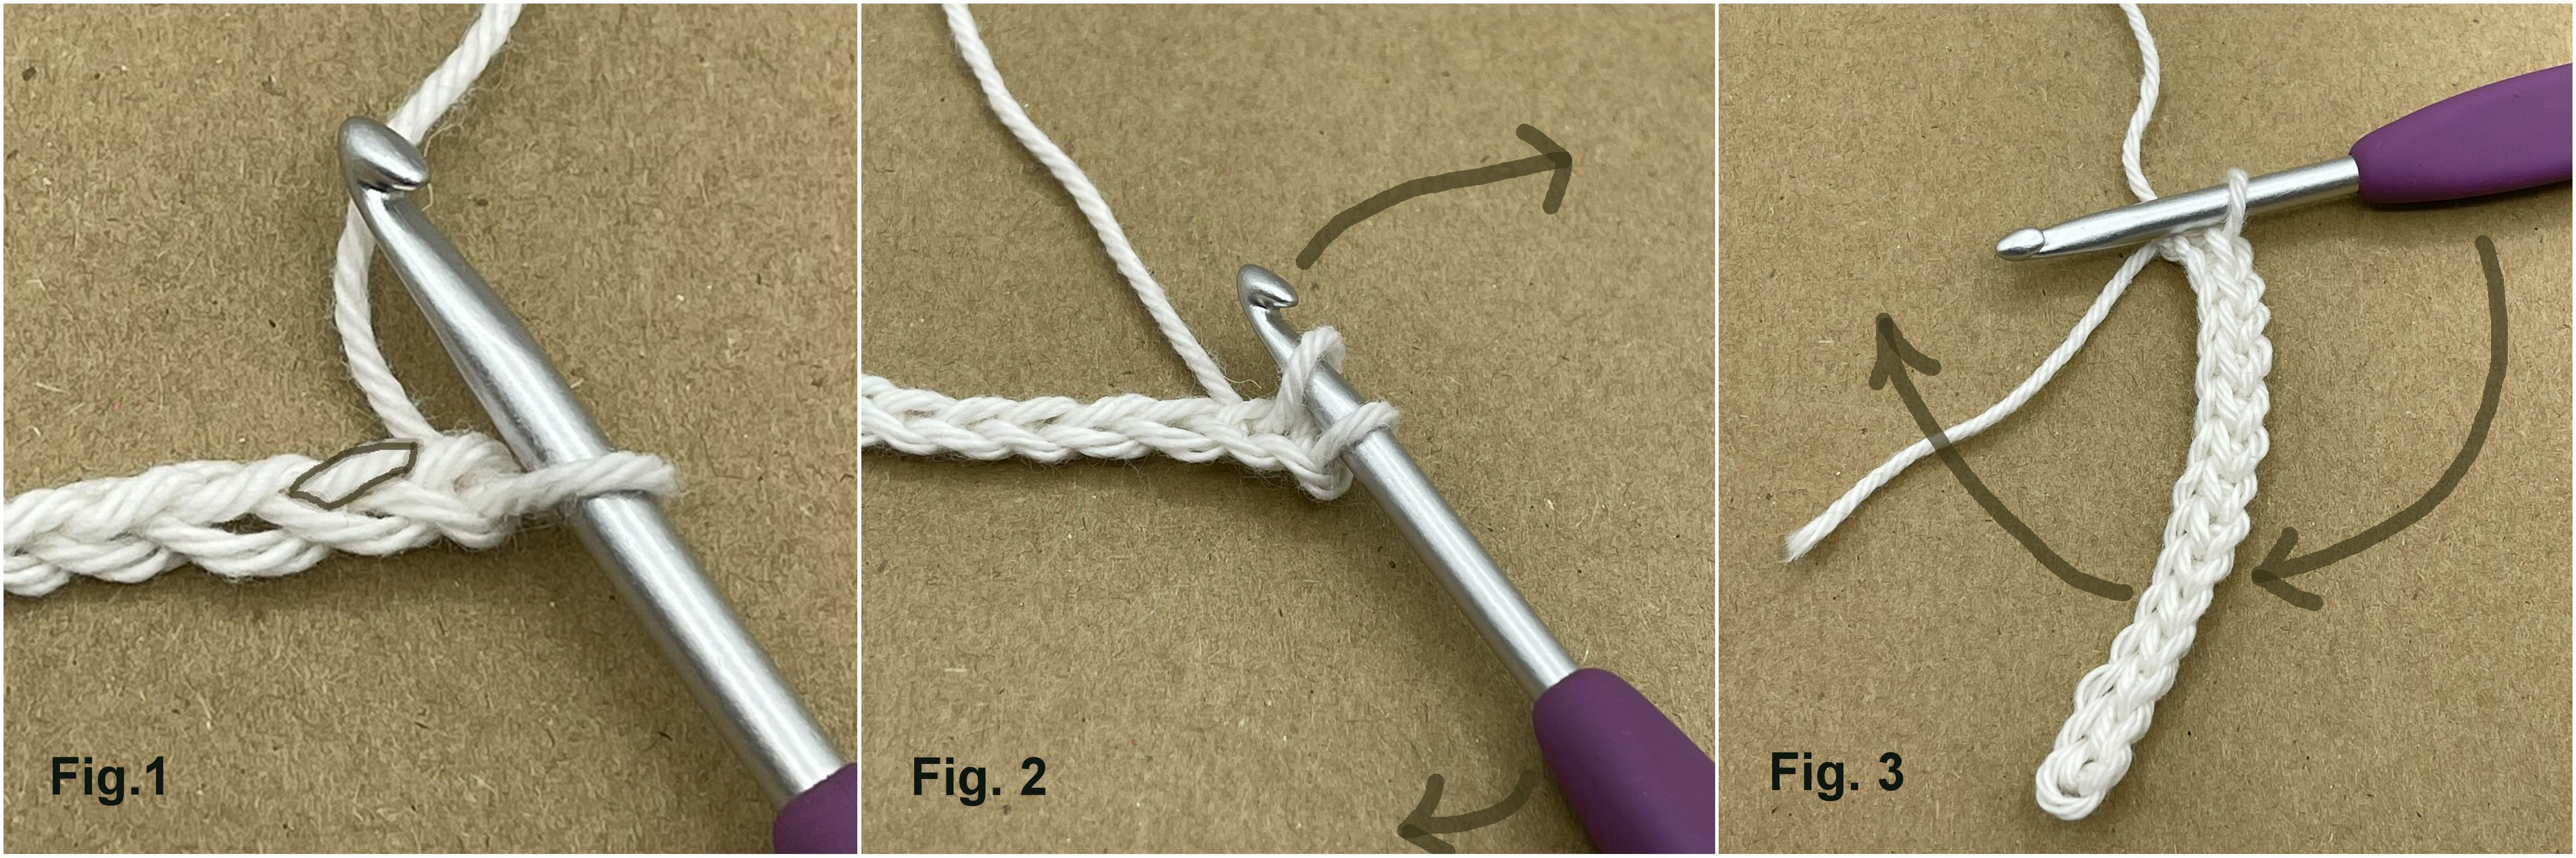 three images showing a crochet chain in white cotton